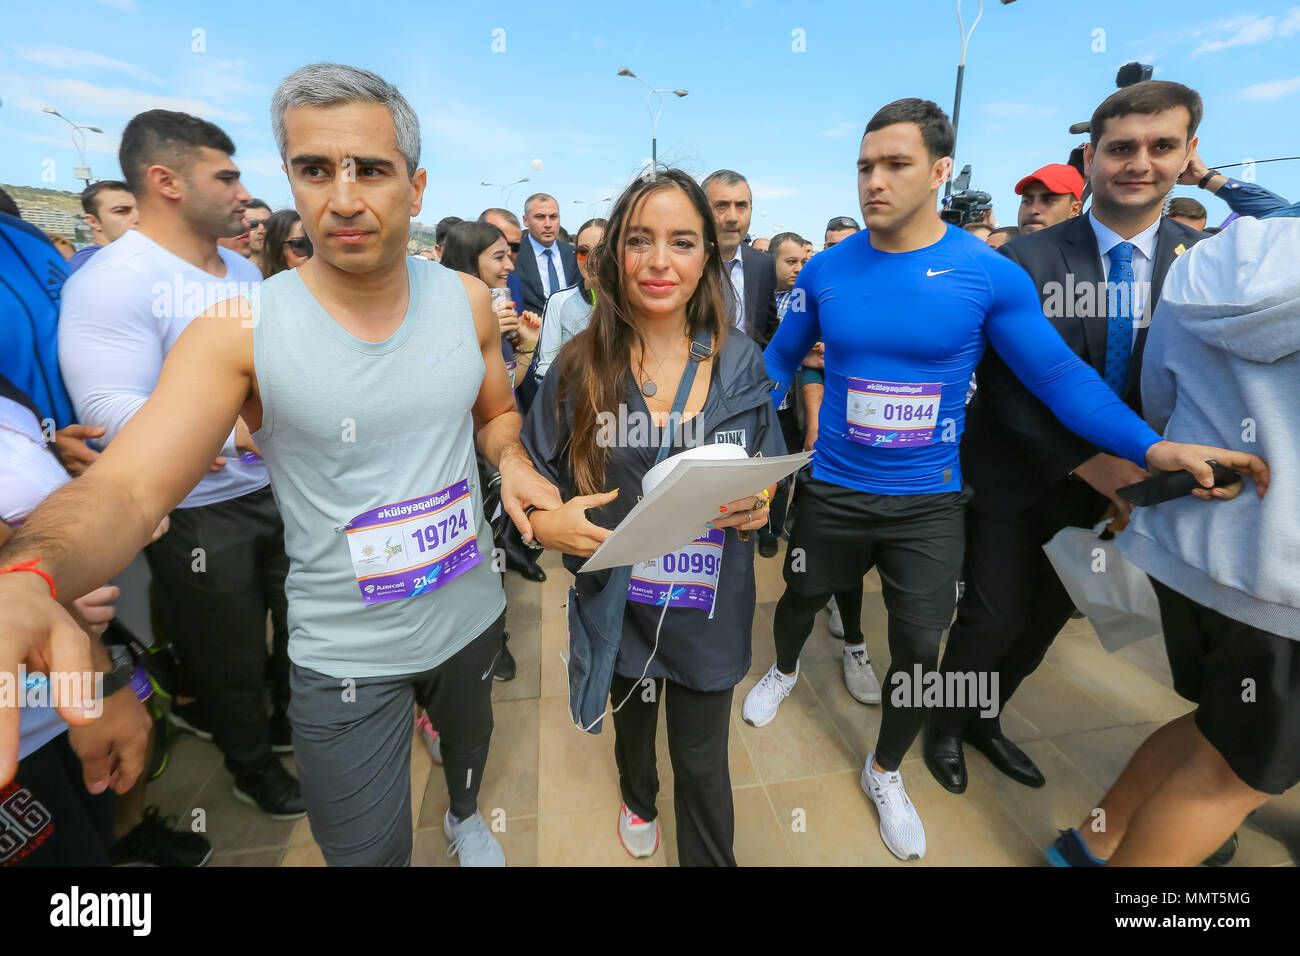 Baku, Azerbaijan. 13th May, 2018. Leyla Aliyeva is the first daughter of the President of Azerbaijan during the marathon runners in Baku. May 13, 2018. The semi-marathon was cover a distance of 21 kilometers, starting at the national Flag Square and finishing at Baku Olympic Stadium. This year’s semi-marathon was open to anyone above the age of 16 upon prior registration, and the event got nearly 18,000 registered participants. Credit: Aziz Karimov/Alamy Live News Stock Photo